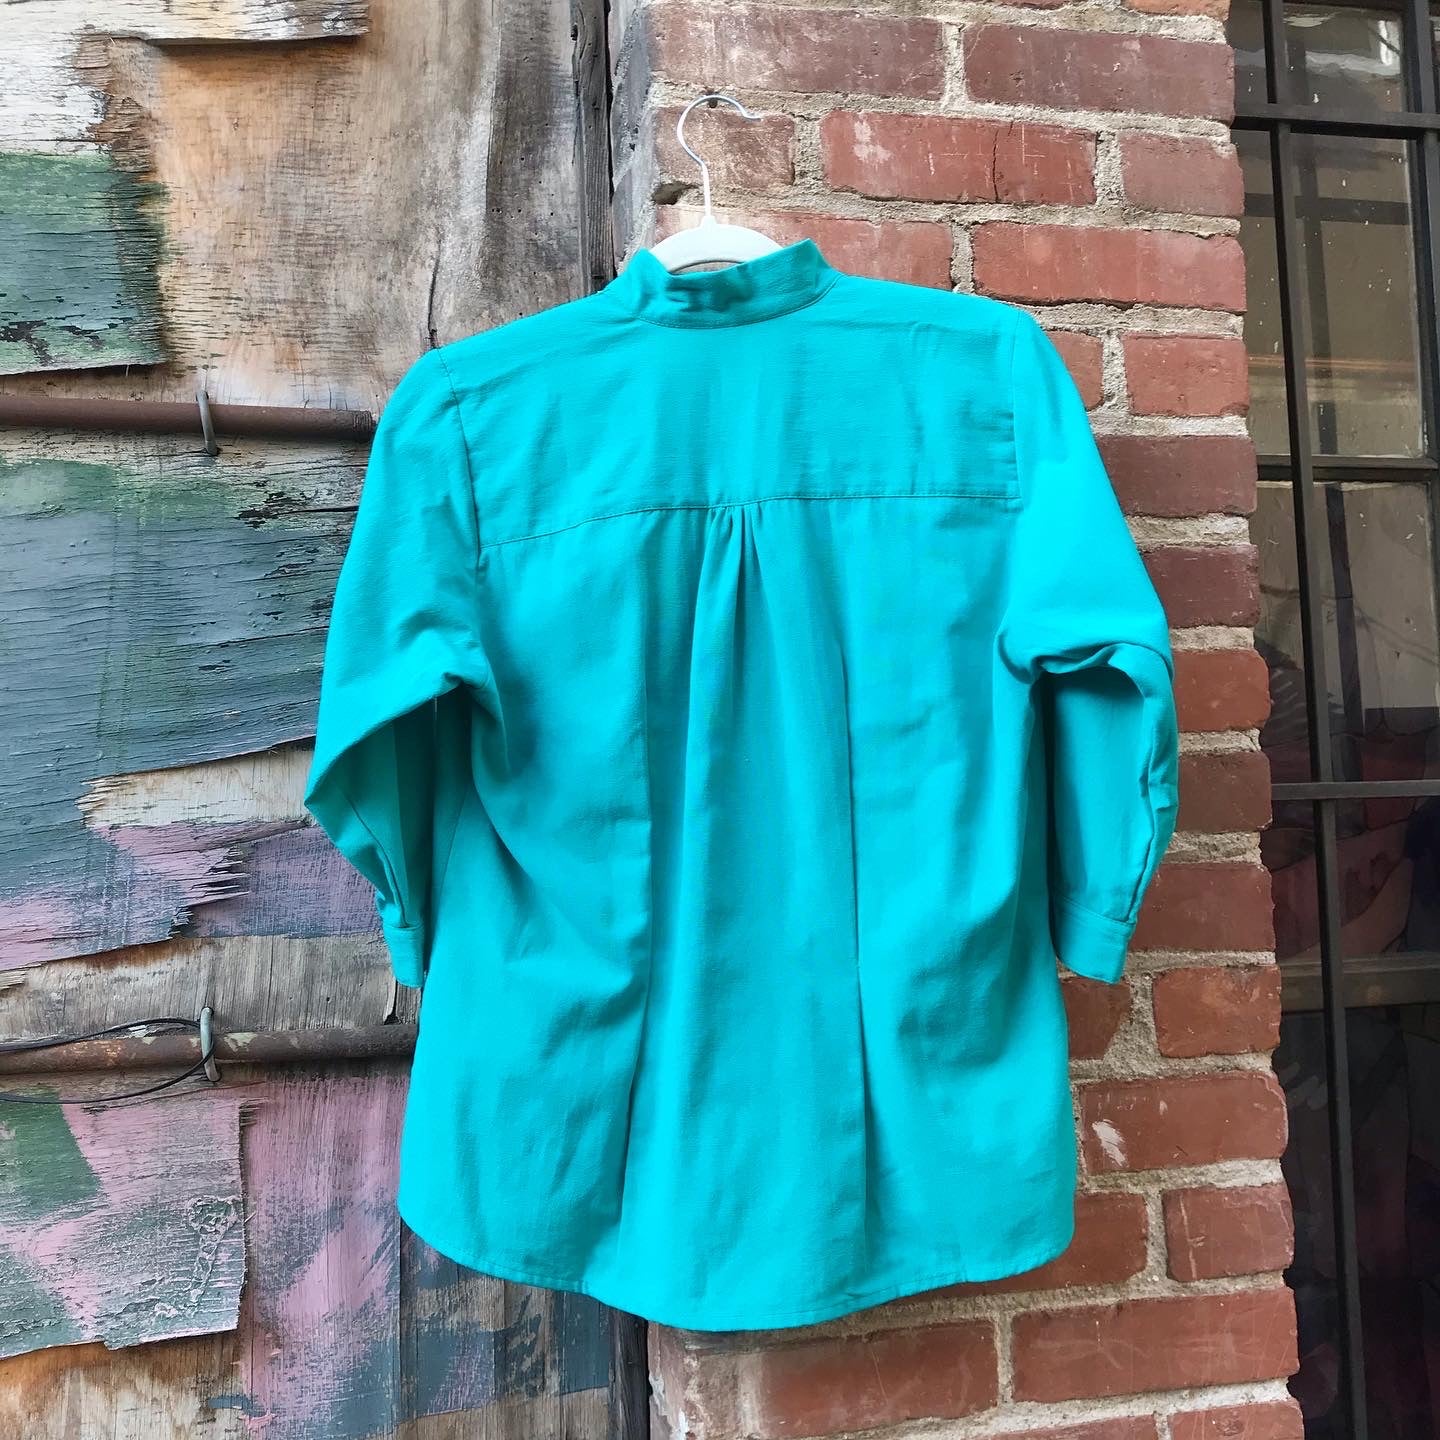 Women’s Embroidered Button-Down in Teal